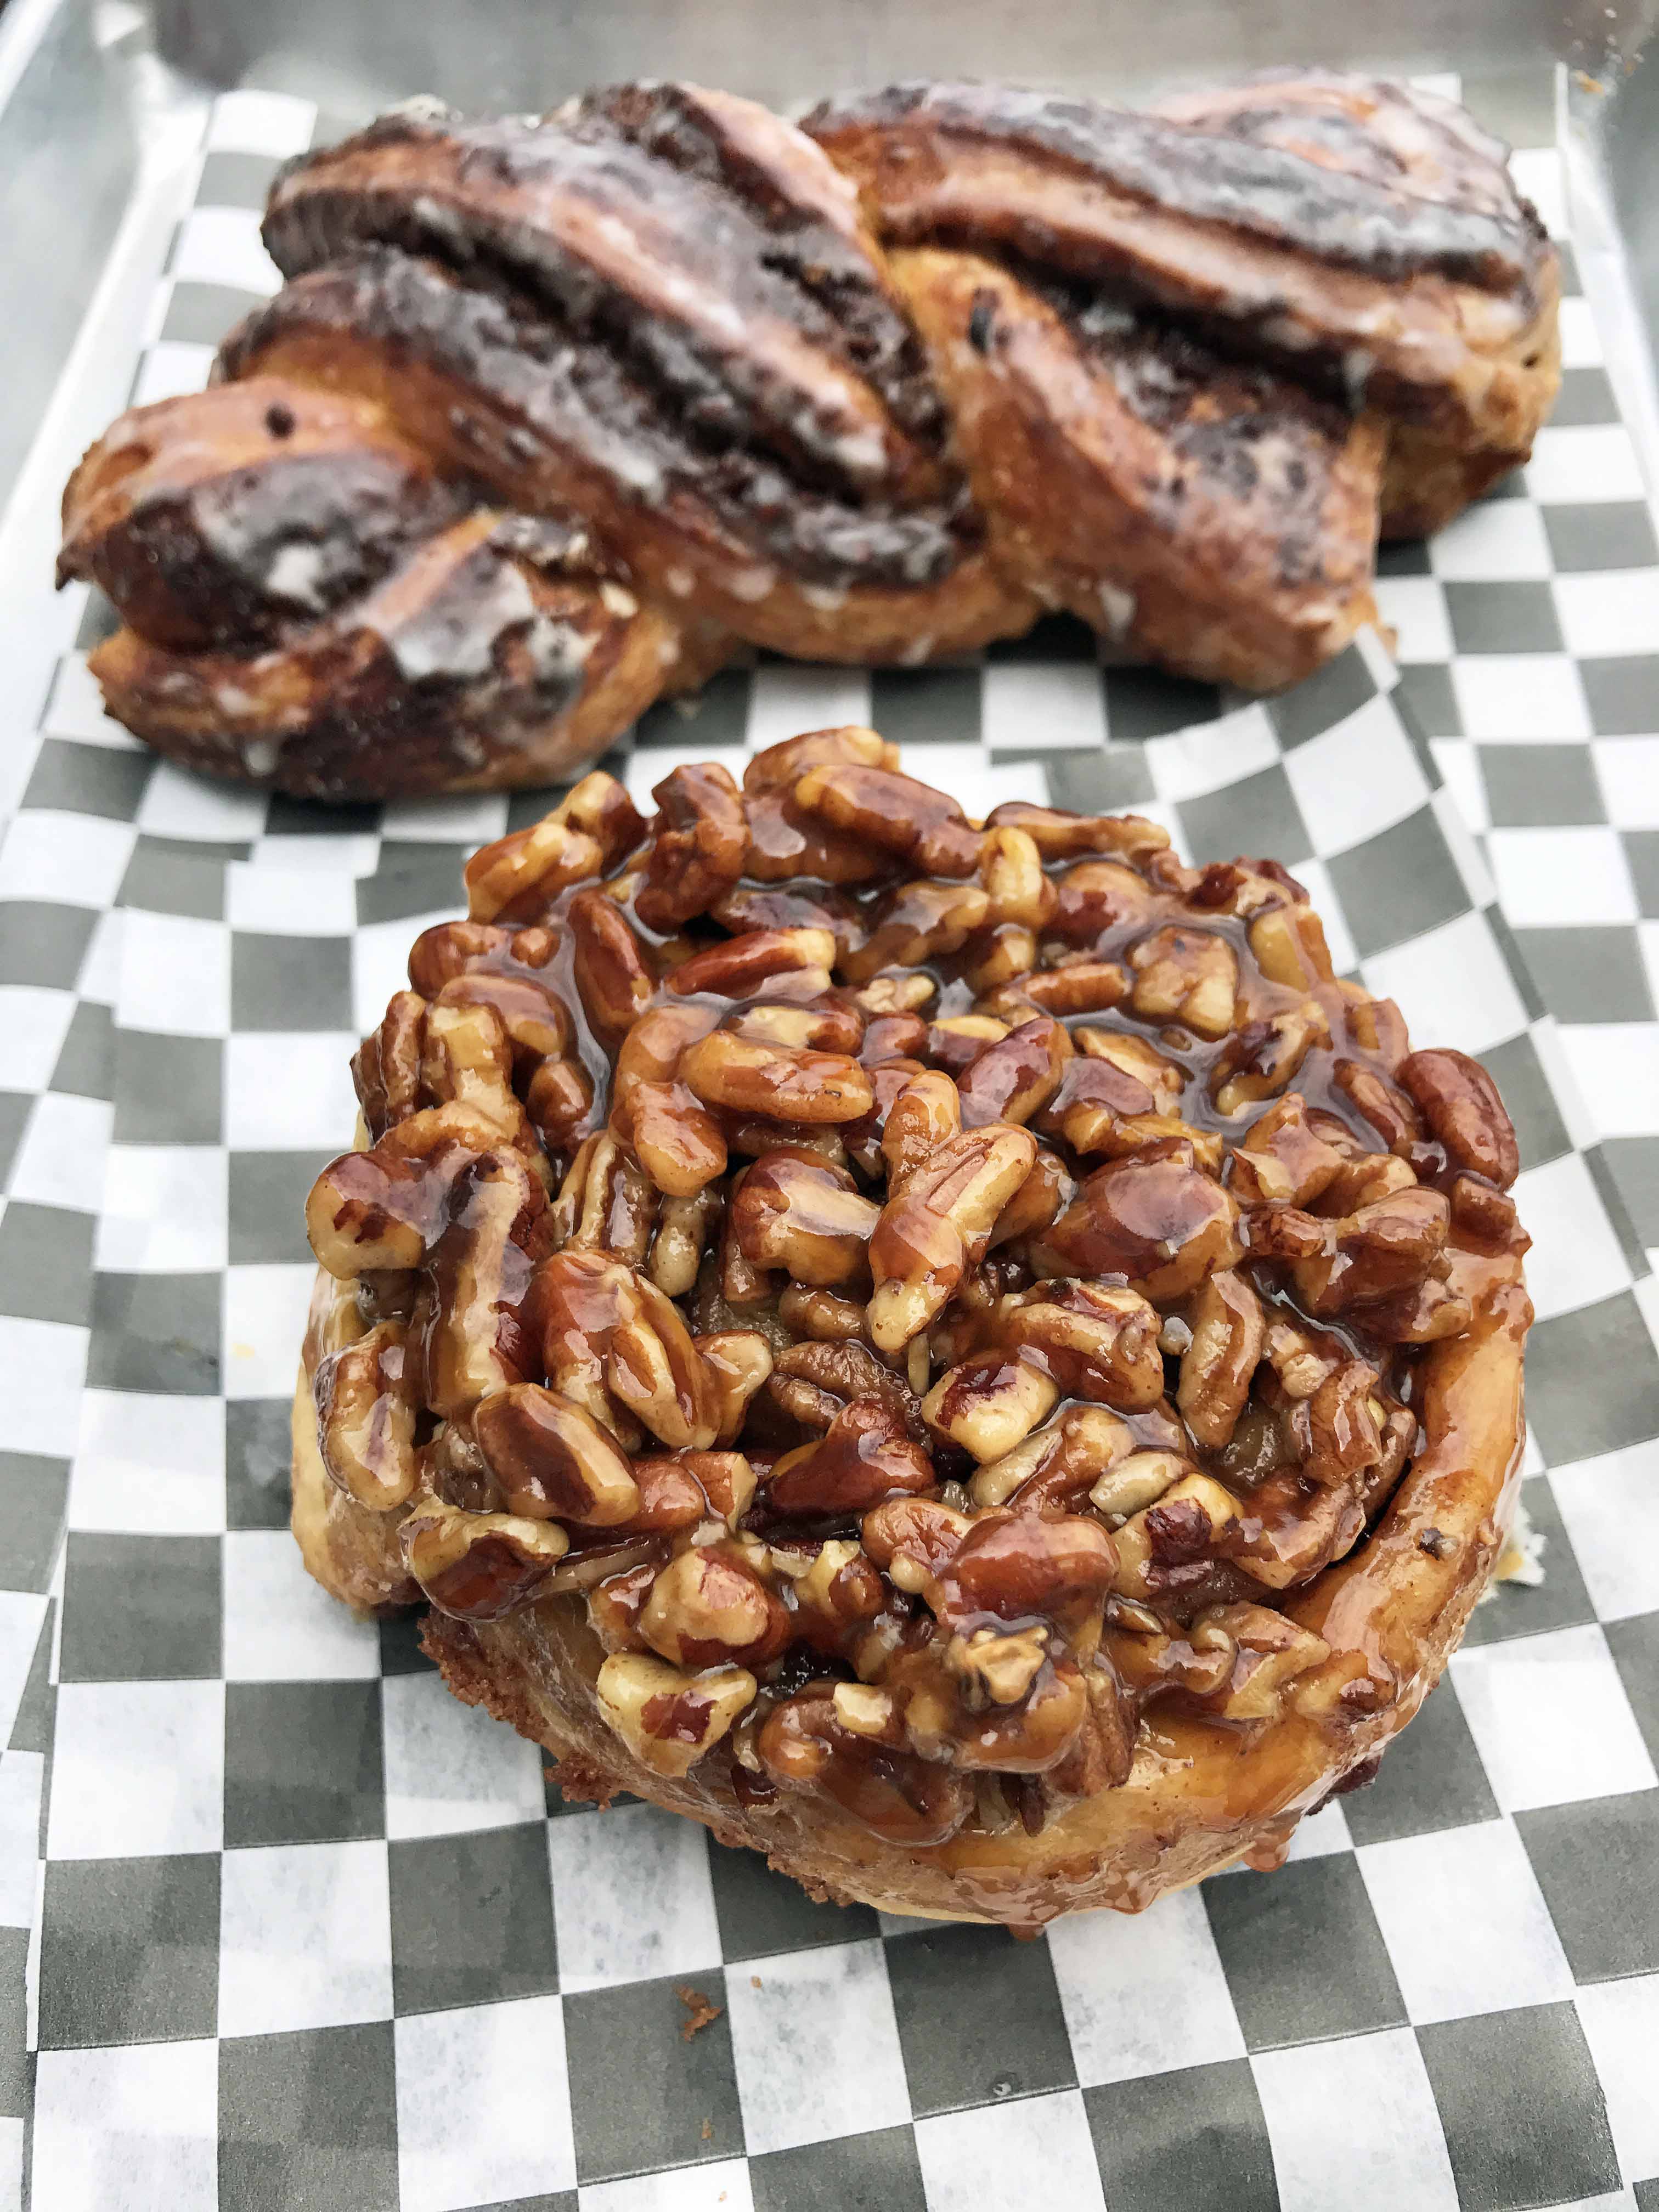 Blackmarket Bakery in Costa Mesa California. Caramel Pecan Roll by Blackmarket Bakery. Best Places to Eat in Orange County.